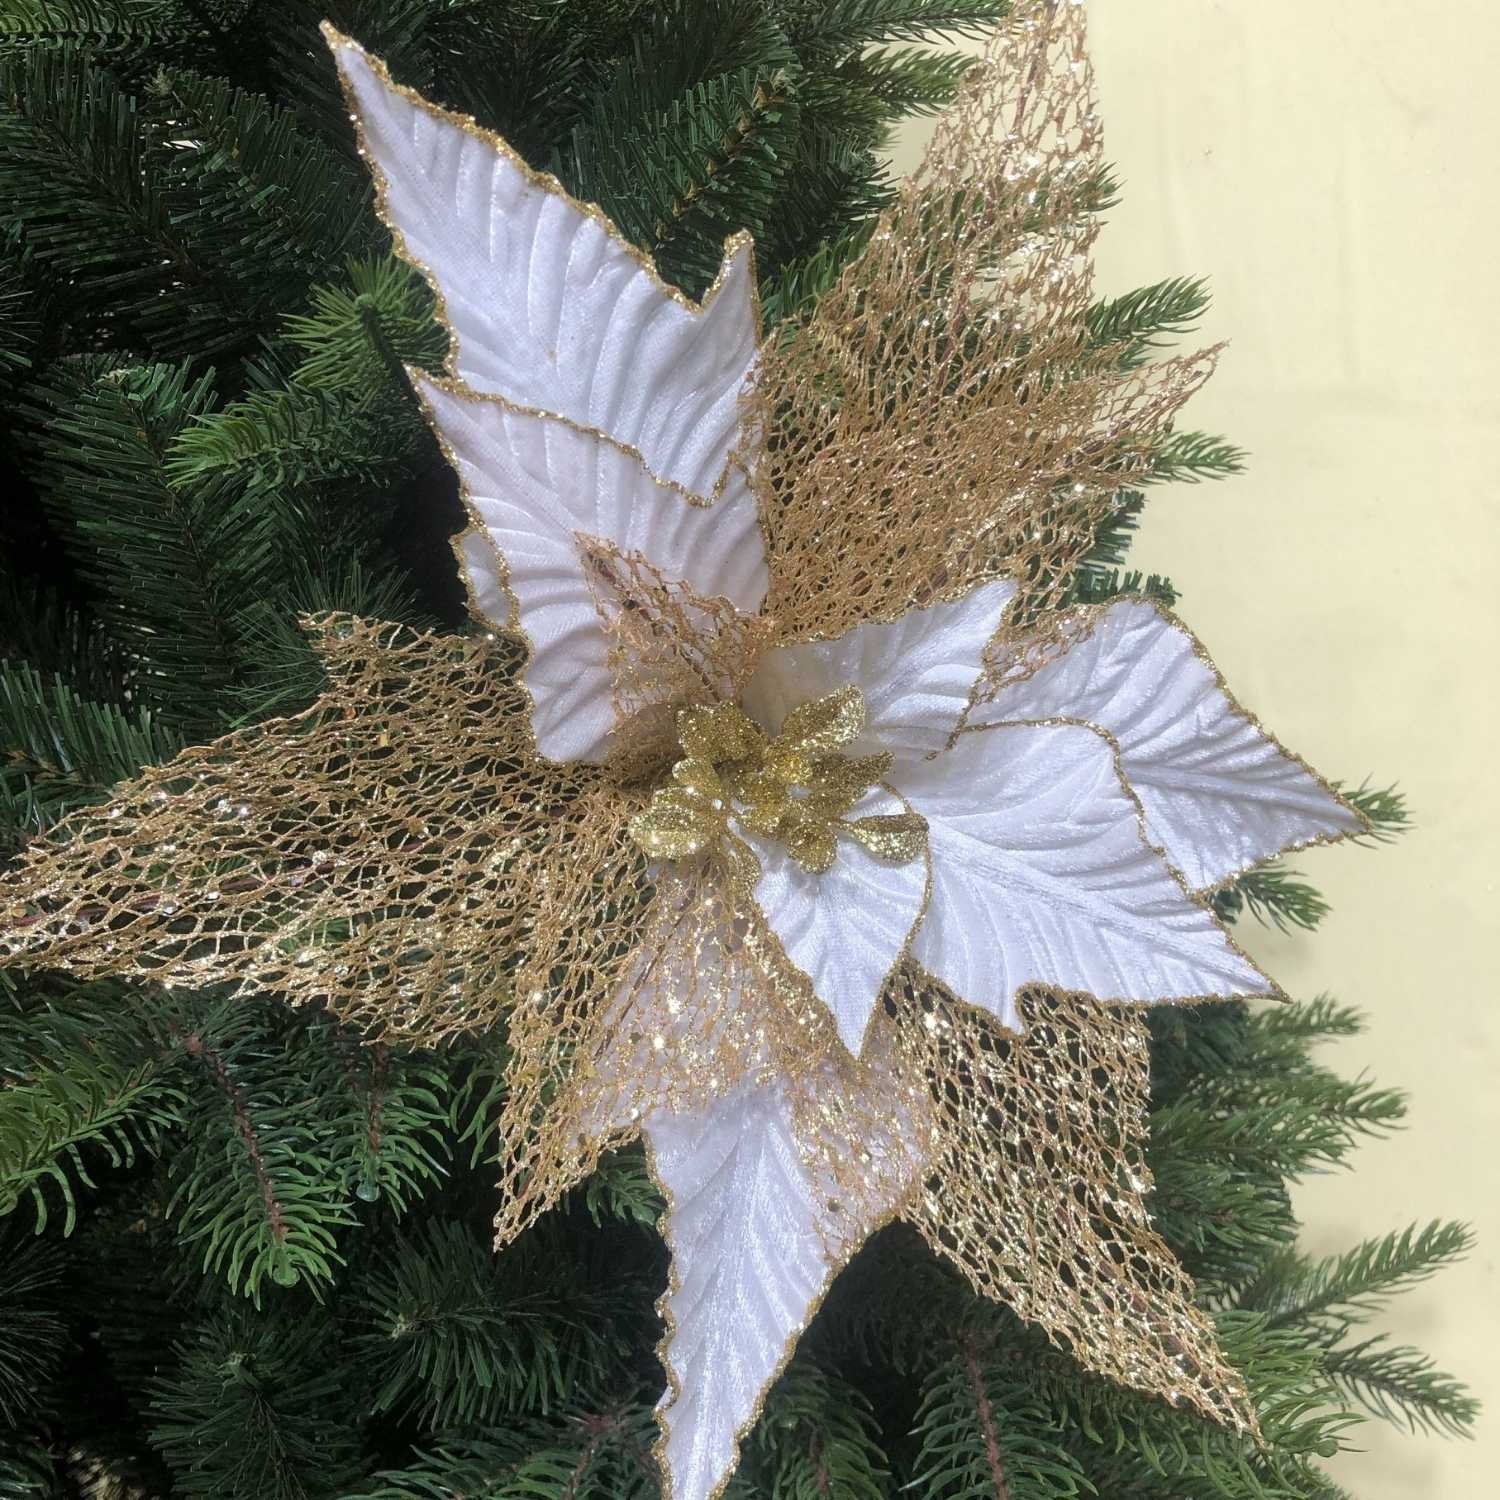 Gold Poinsettia Flowers For Christmas Tree